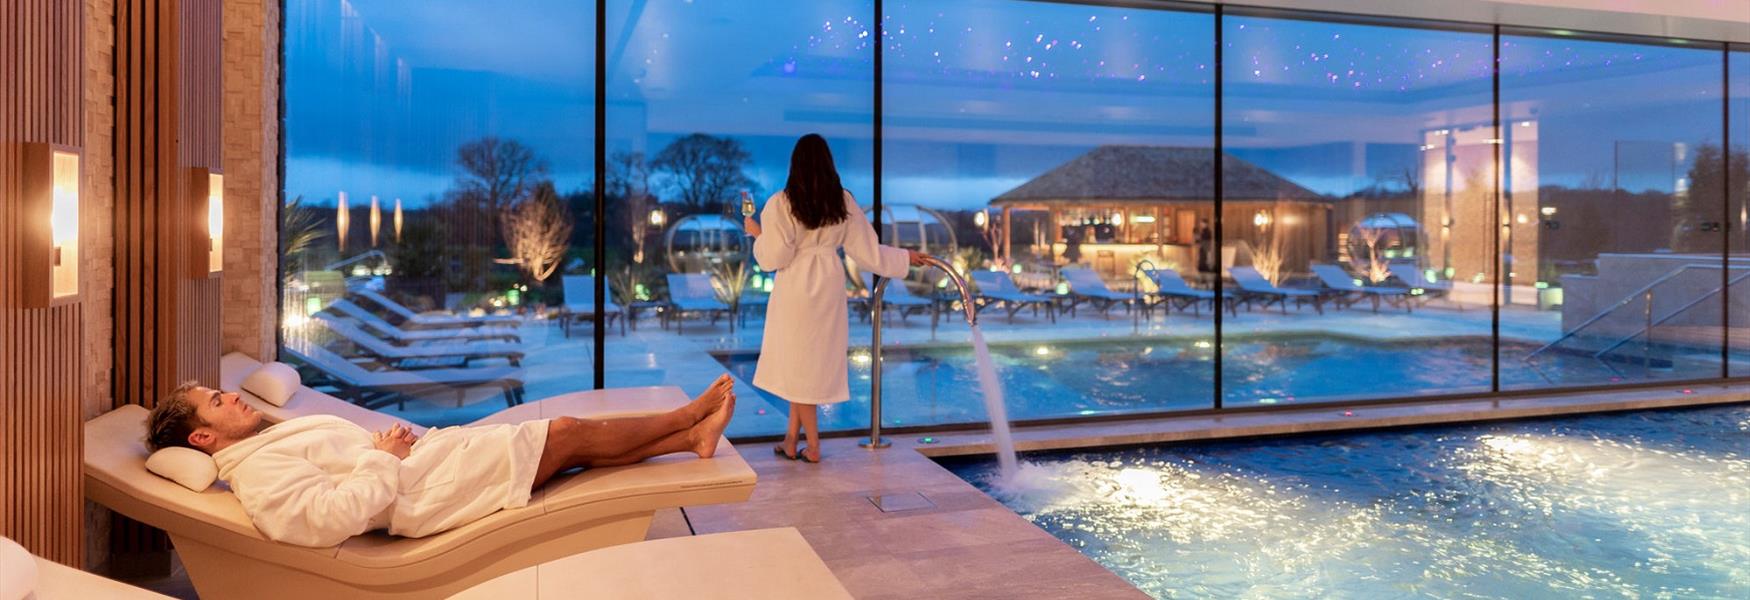 Spa Breaks in Chester & Cheshire